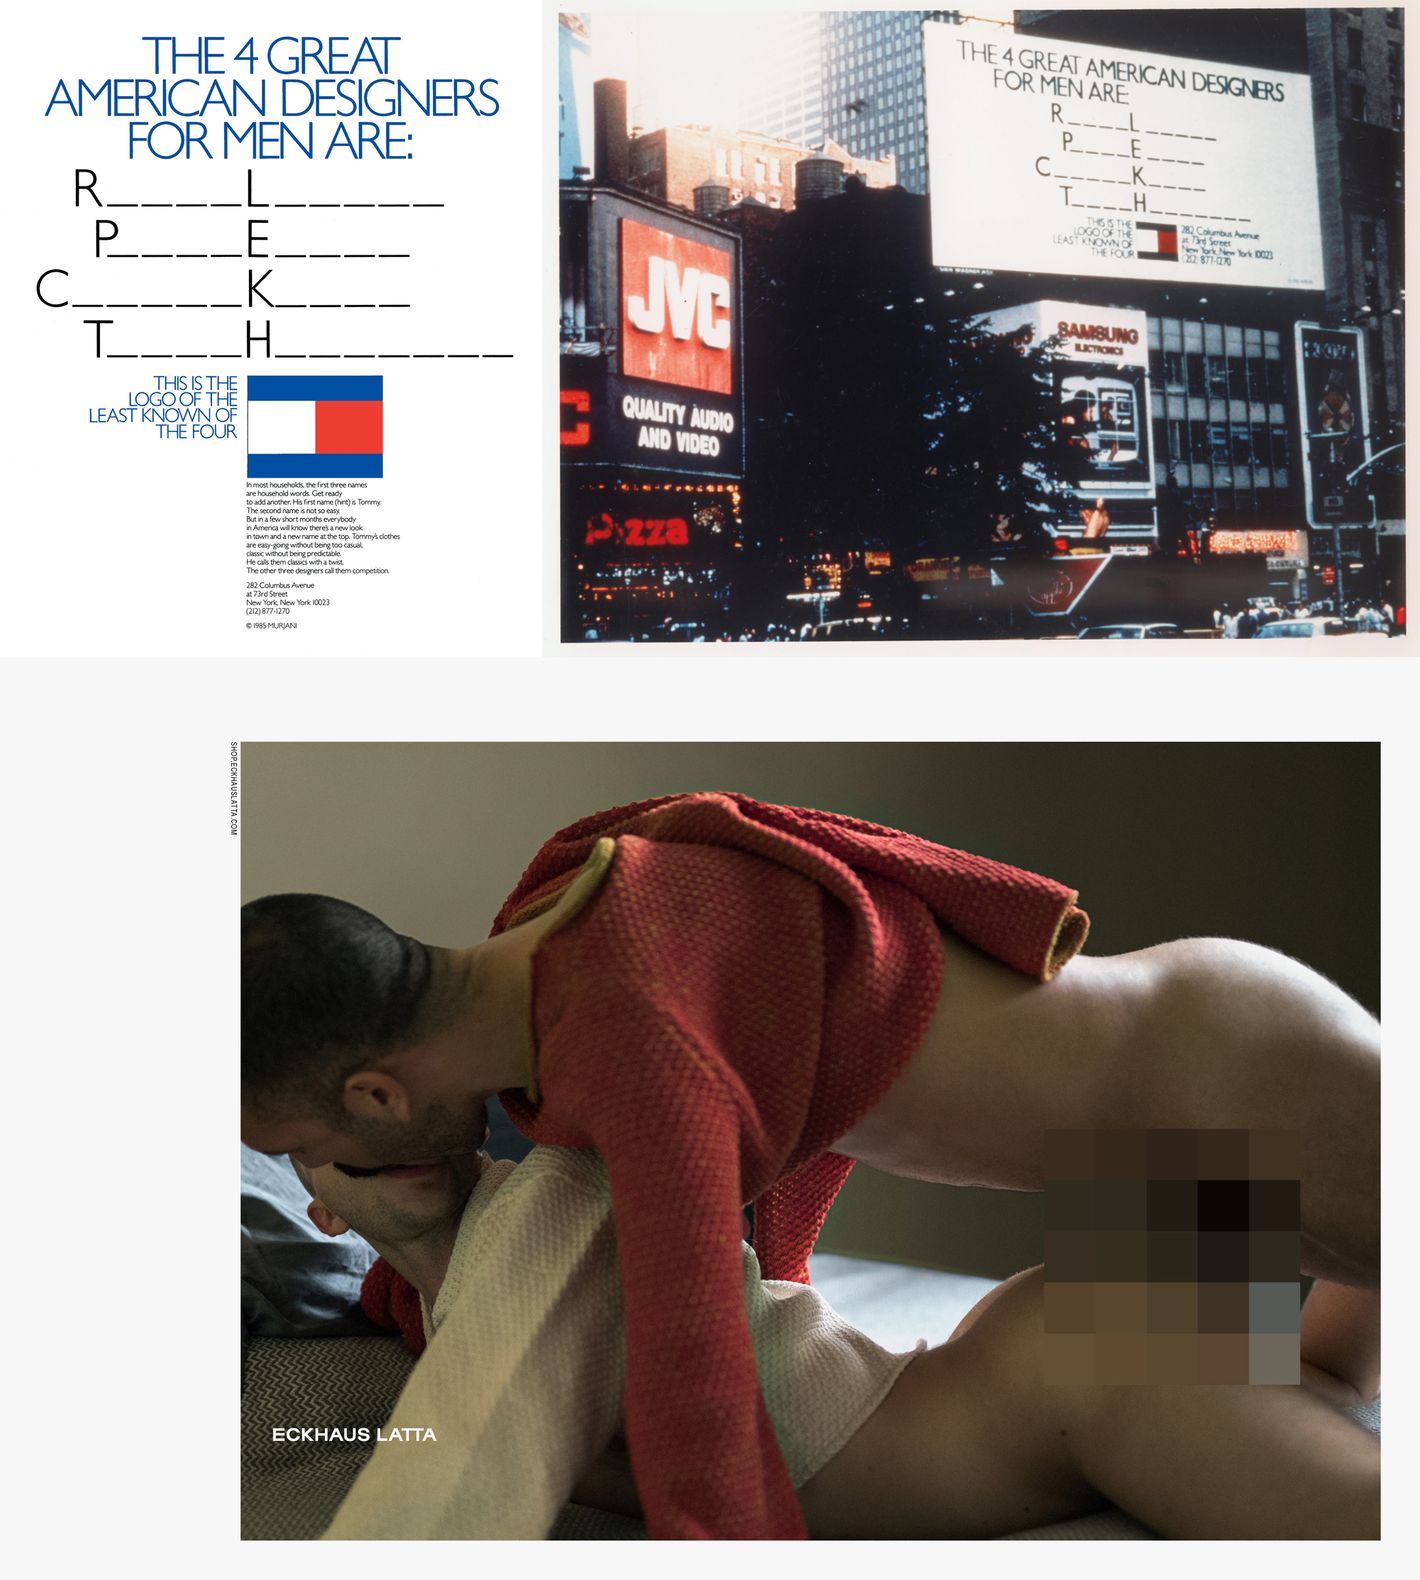 Umulig Perfervid officiel What Do Tommy Hilfiger and Eckhaus Latta Have in Common?